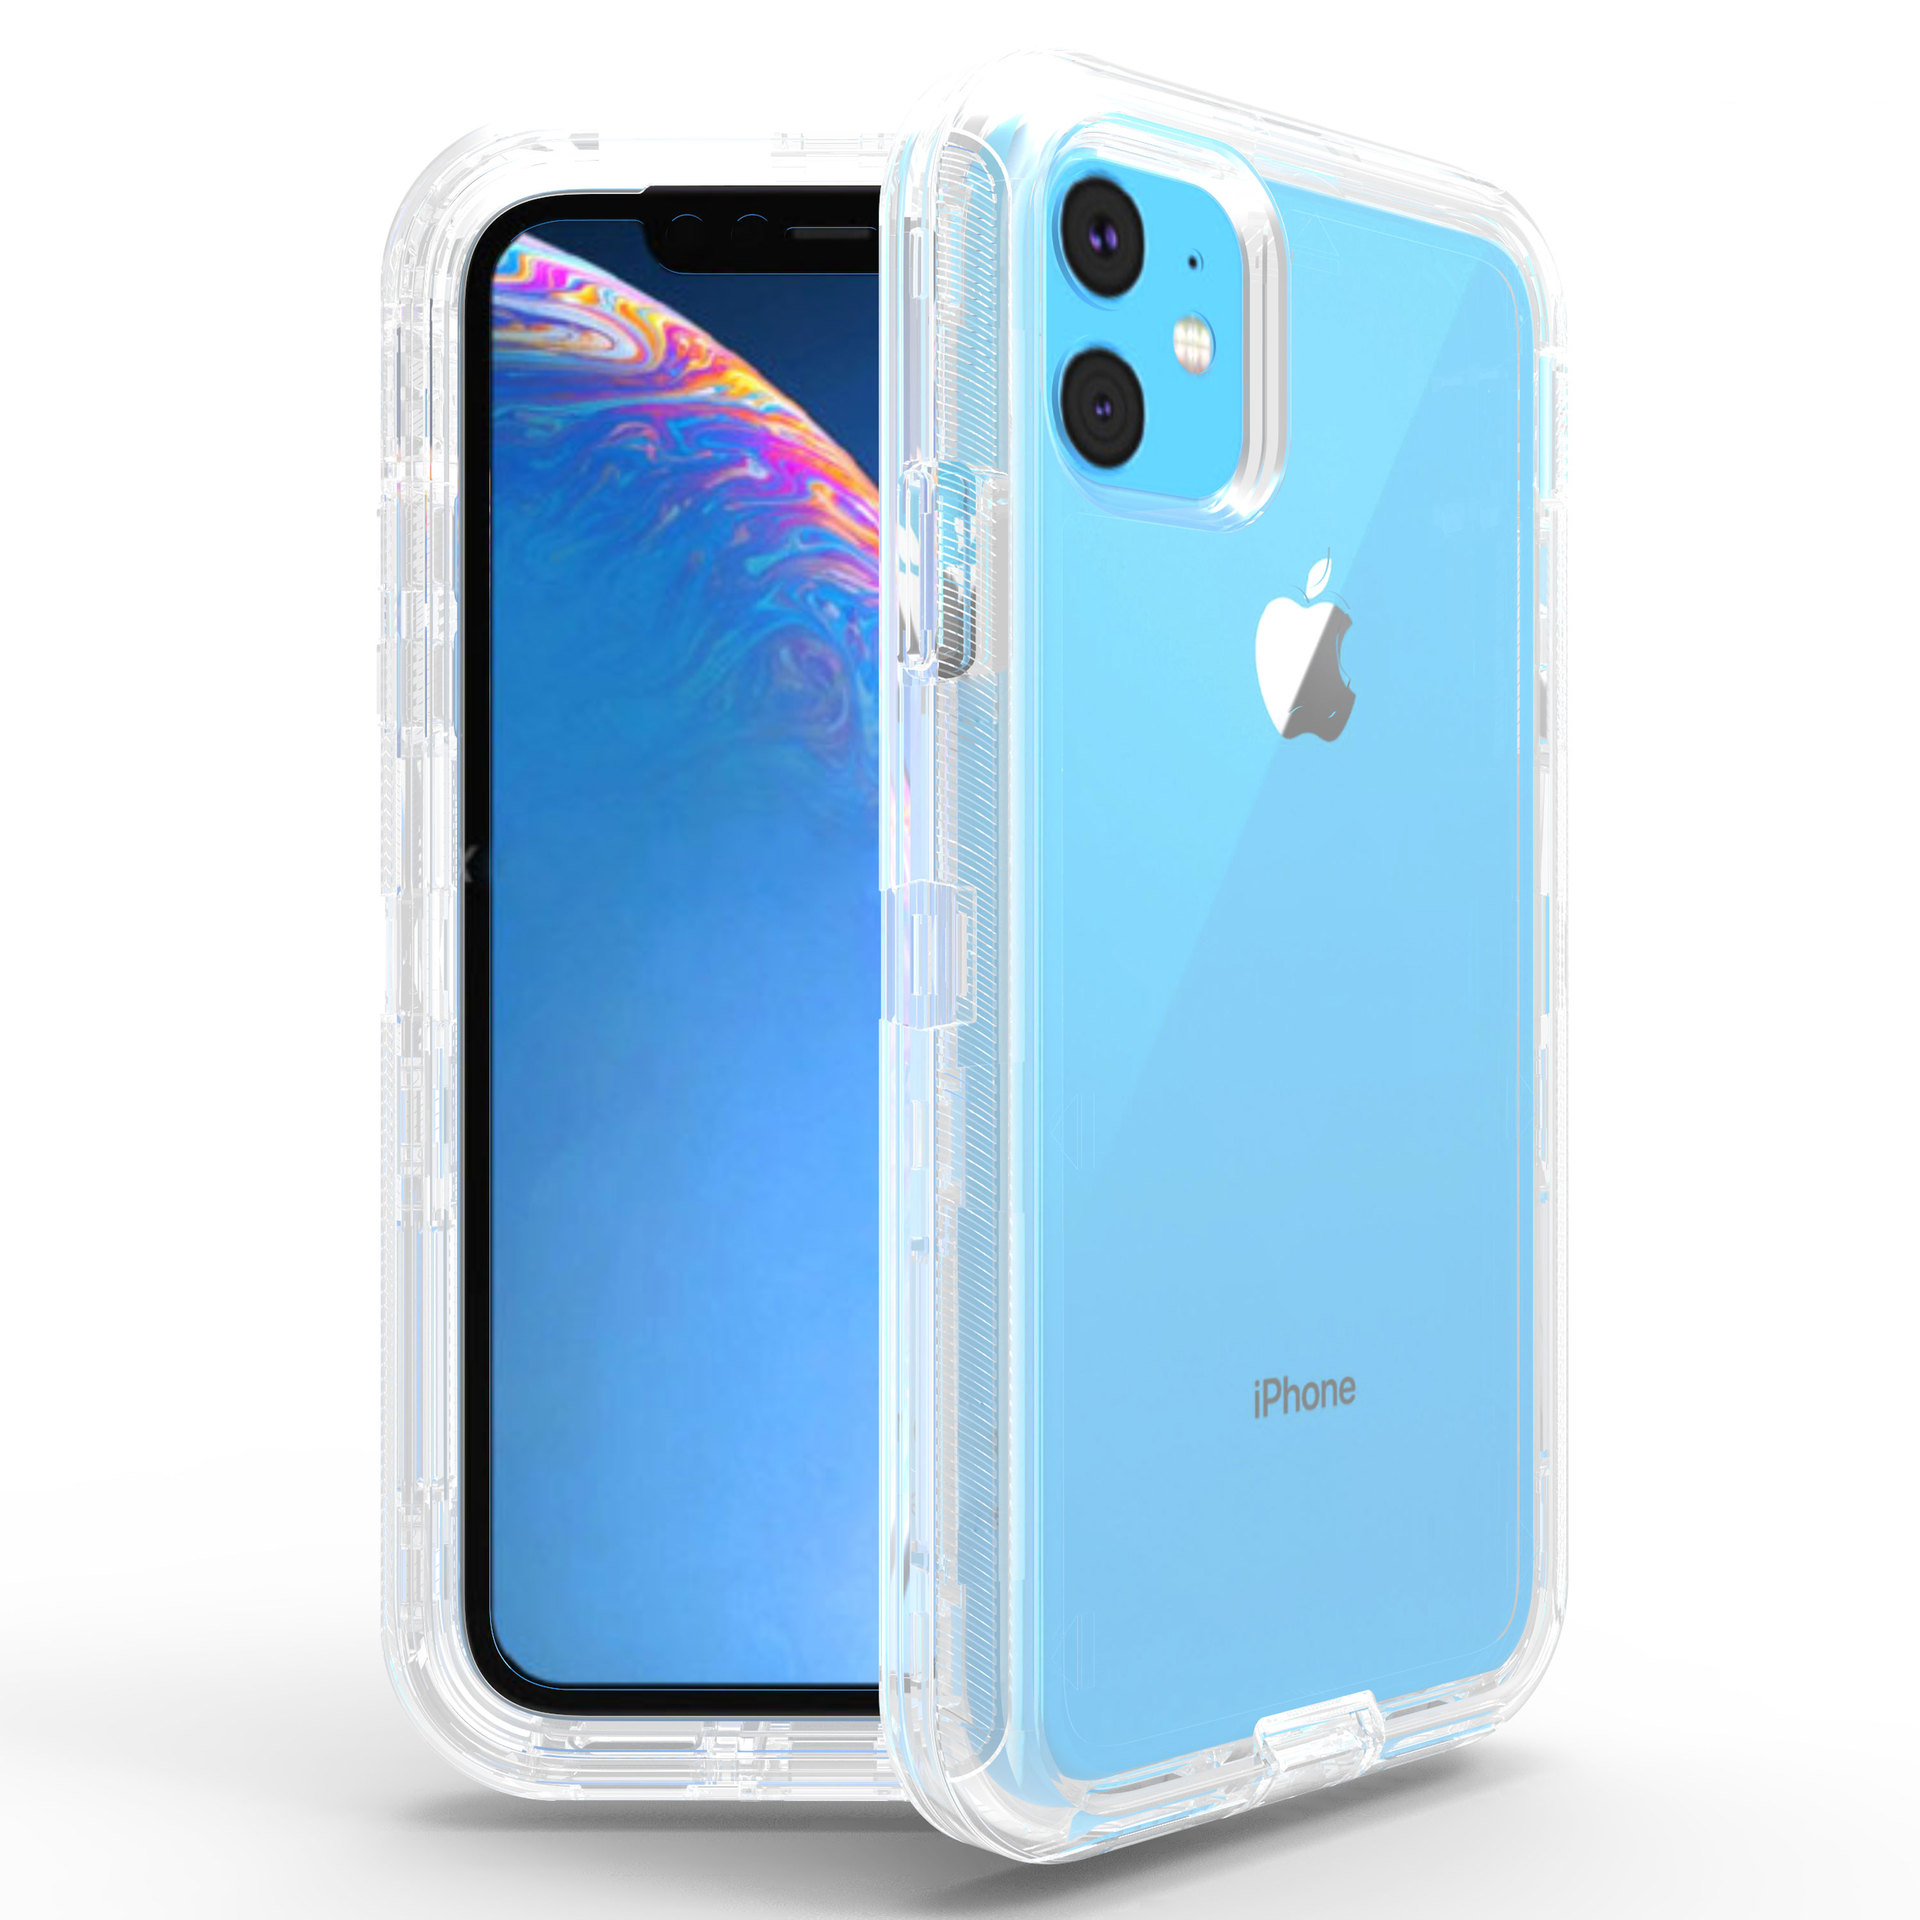 iPHONE 11 Pro Max (6.5in) Transparent Clear Armor Defender Case (Clear)